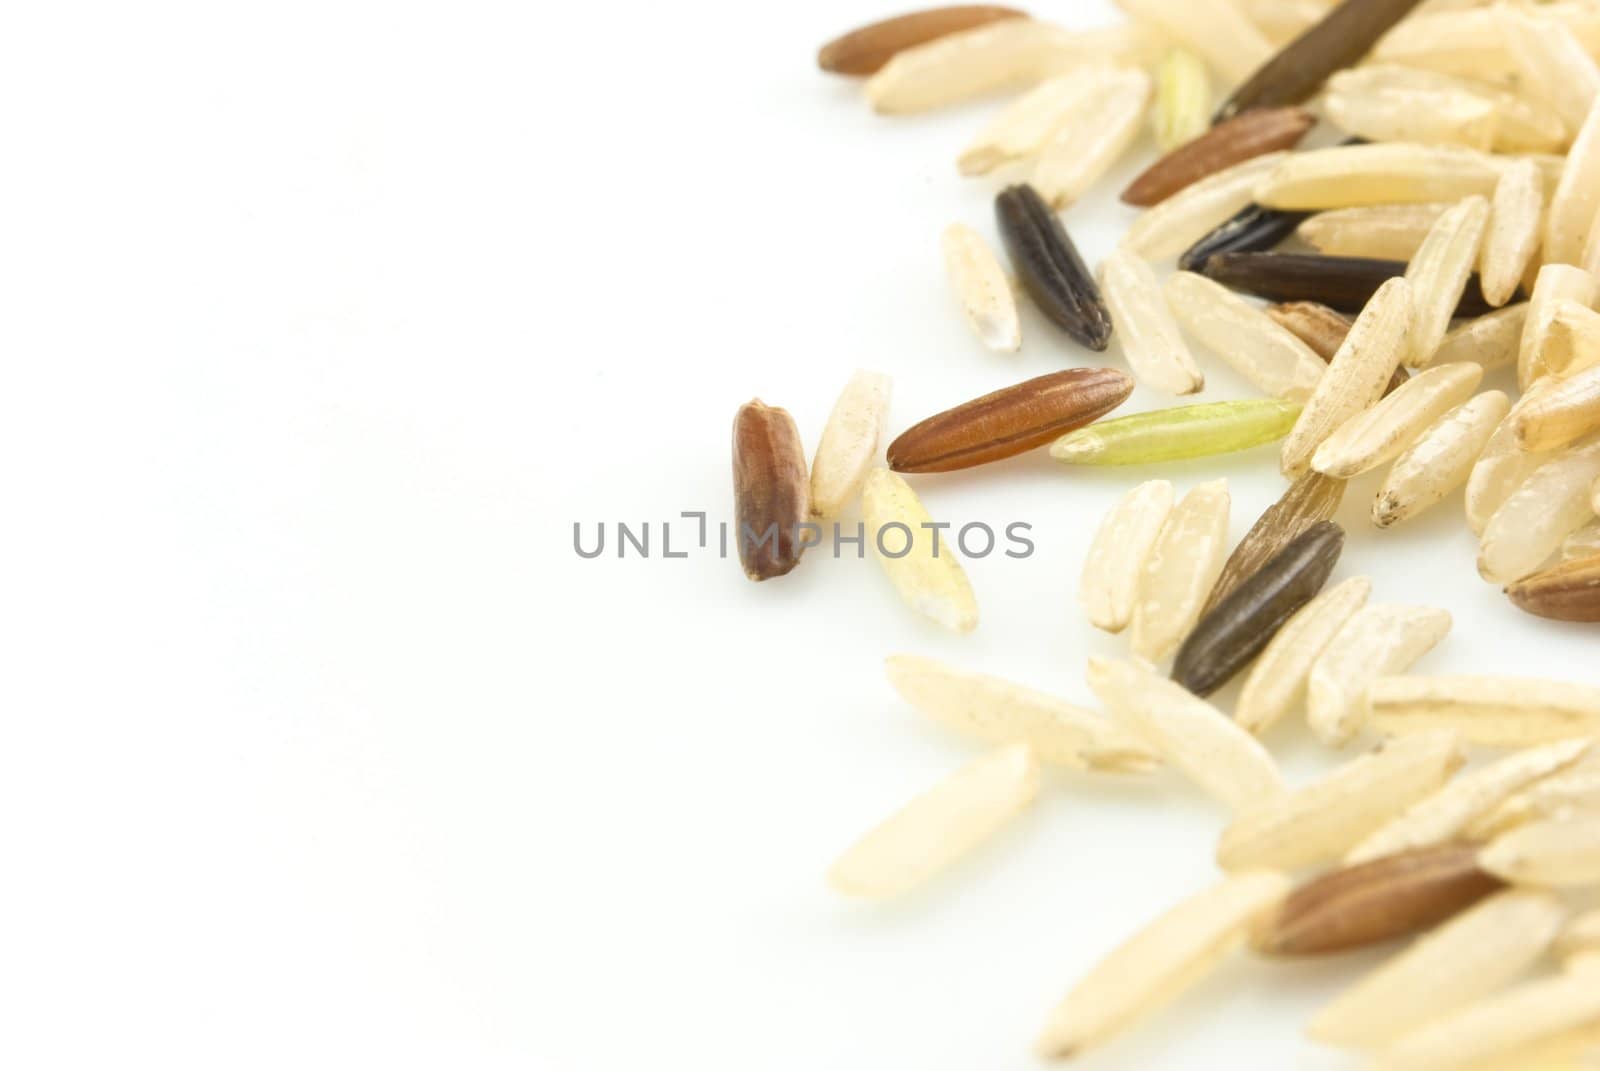 A mixture of three rice types - Basmati, Wild and Red, scattered and isolated on a white background, with copy space in left frame.